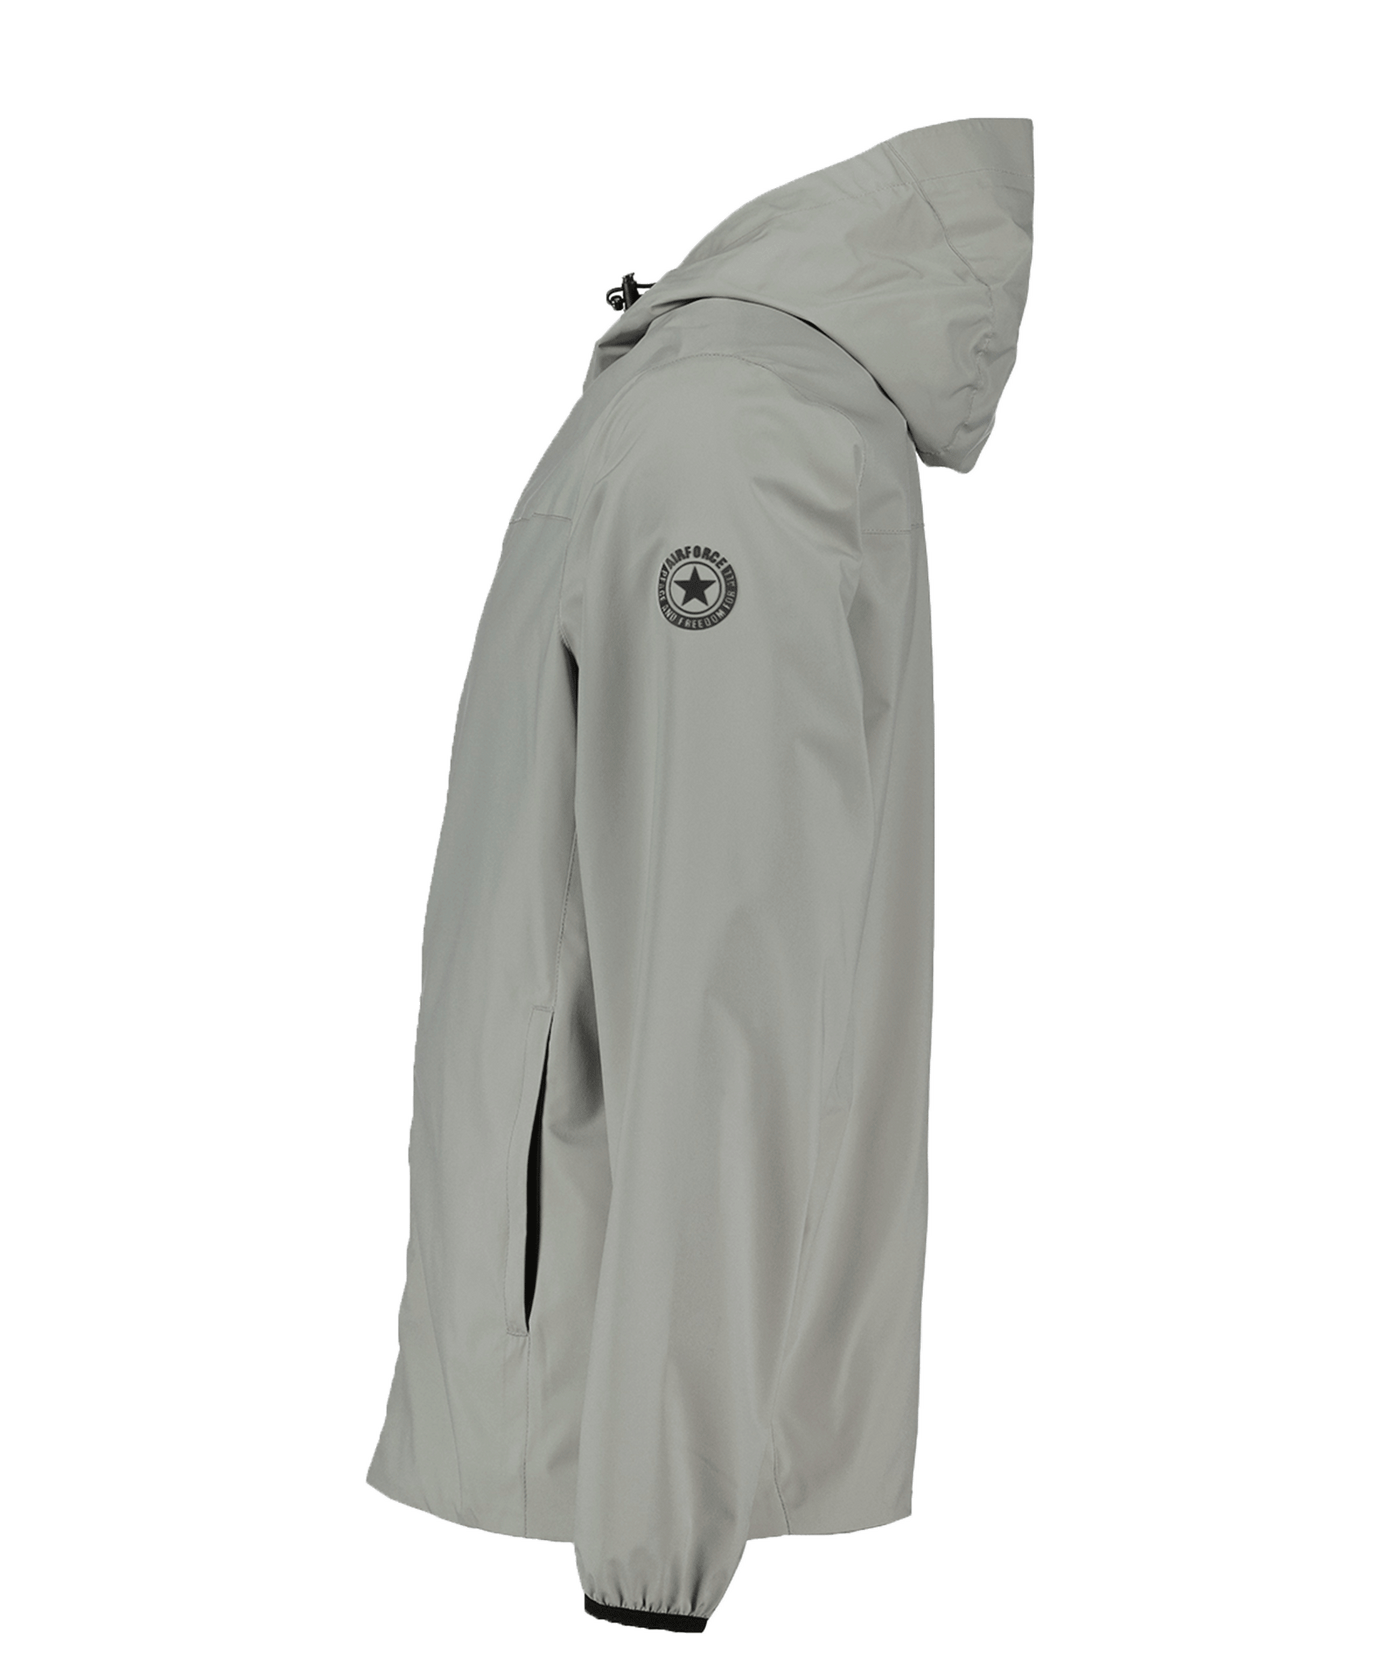 Airforce - Hrm0990 - Lightweight Hooded - 804 Paloma Grey